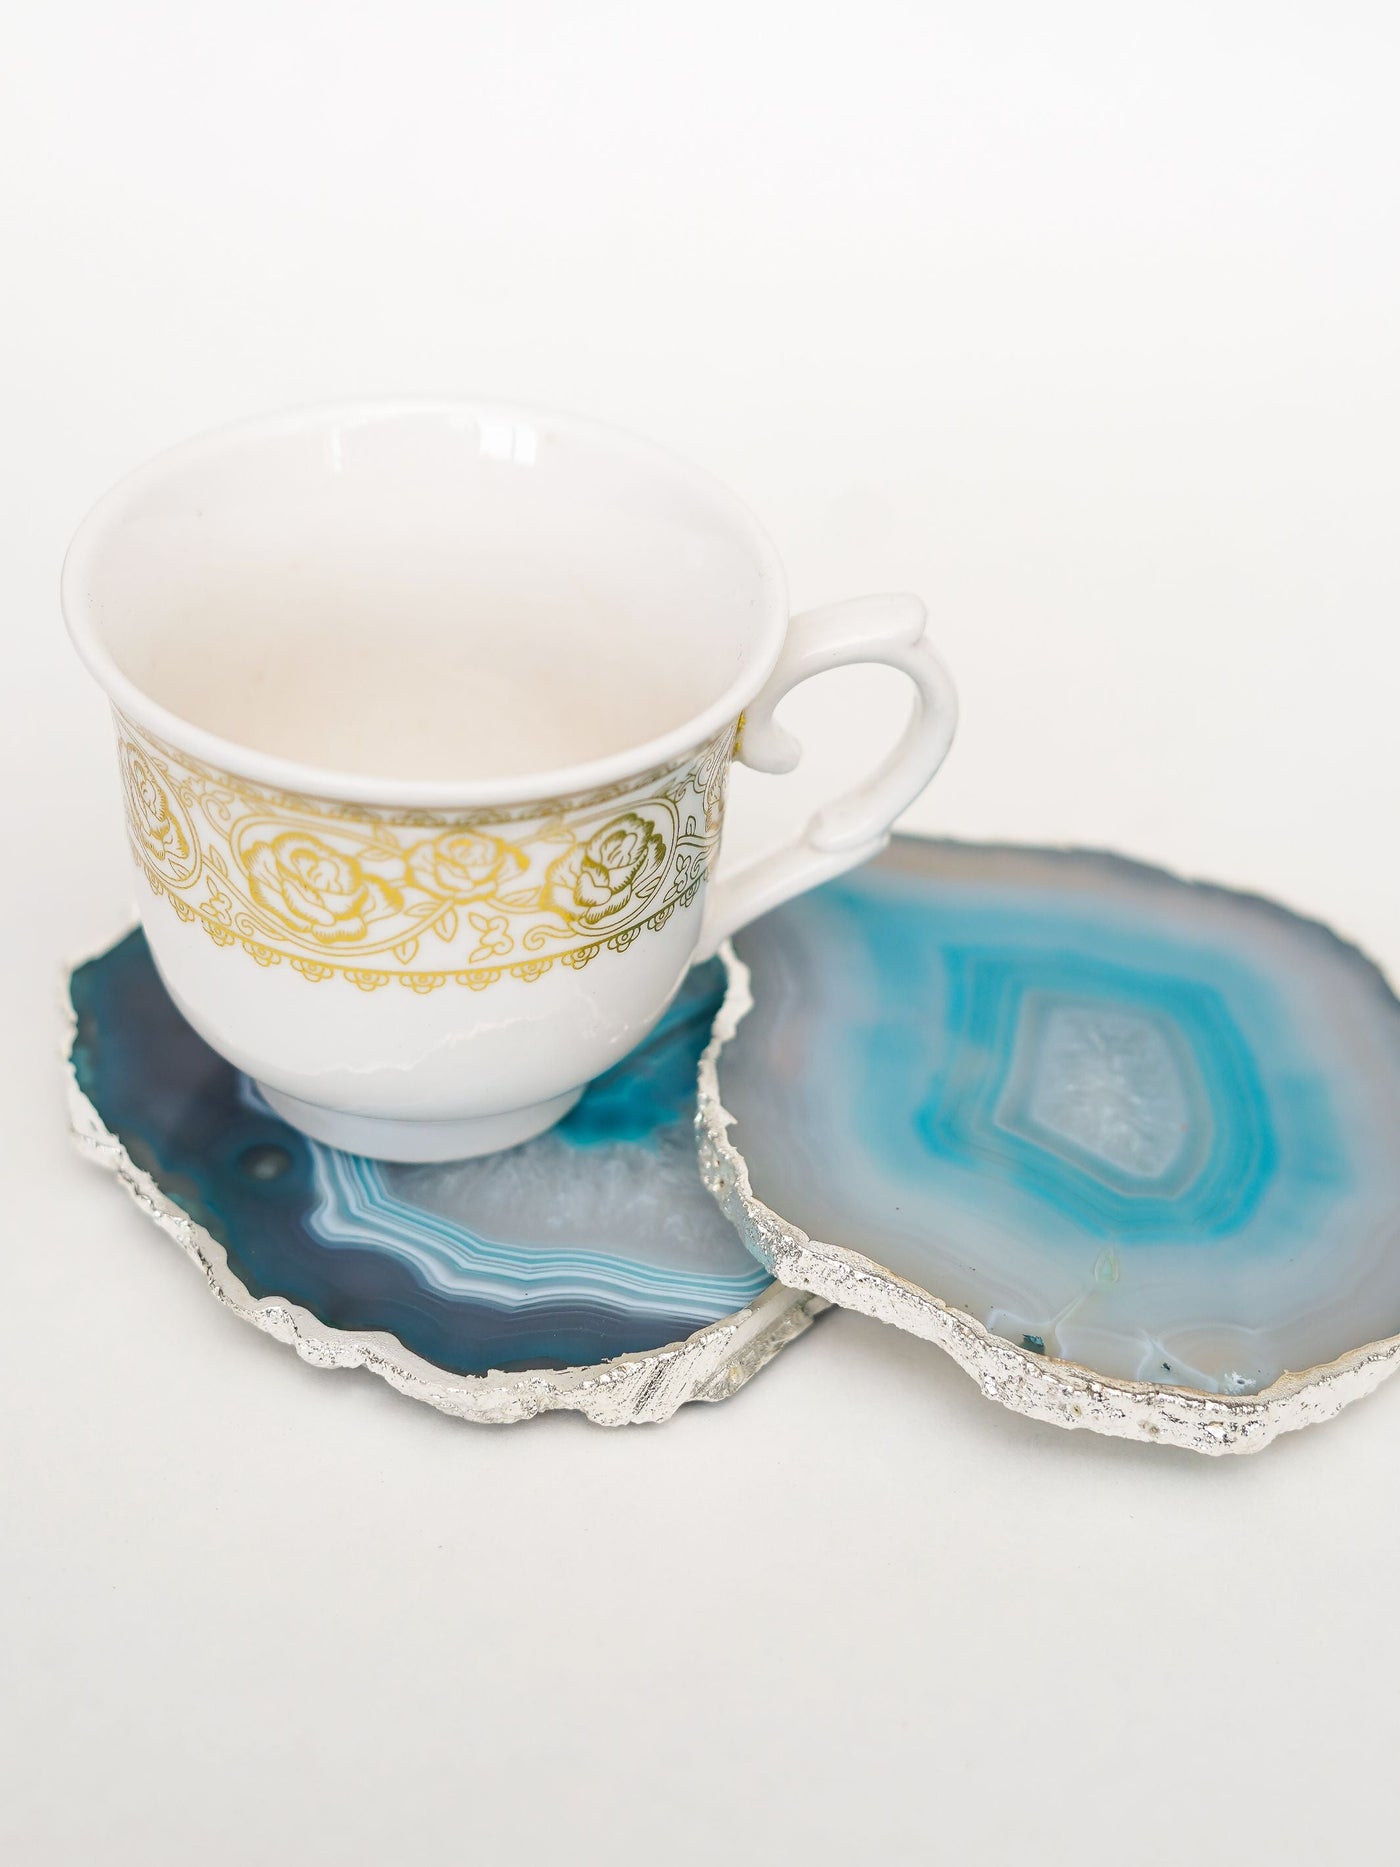 Coaster Set of 2 - Brazilian Agate Green with Silver Plated edge